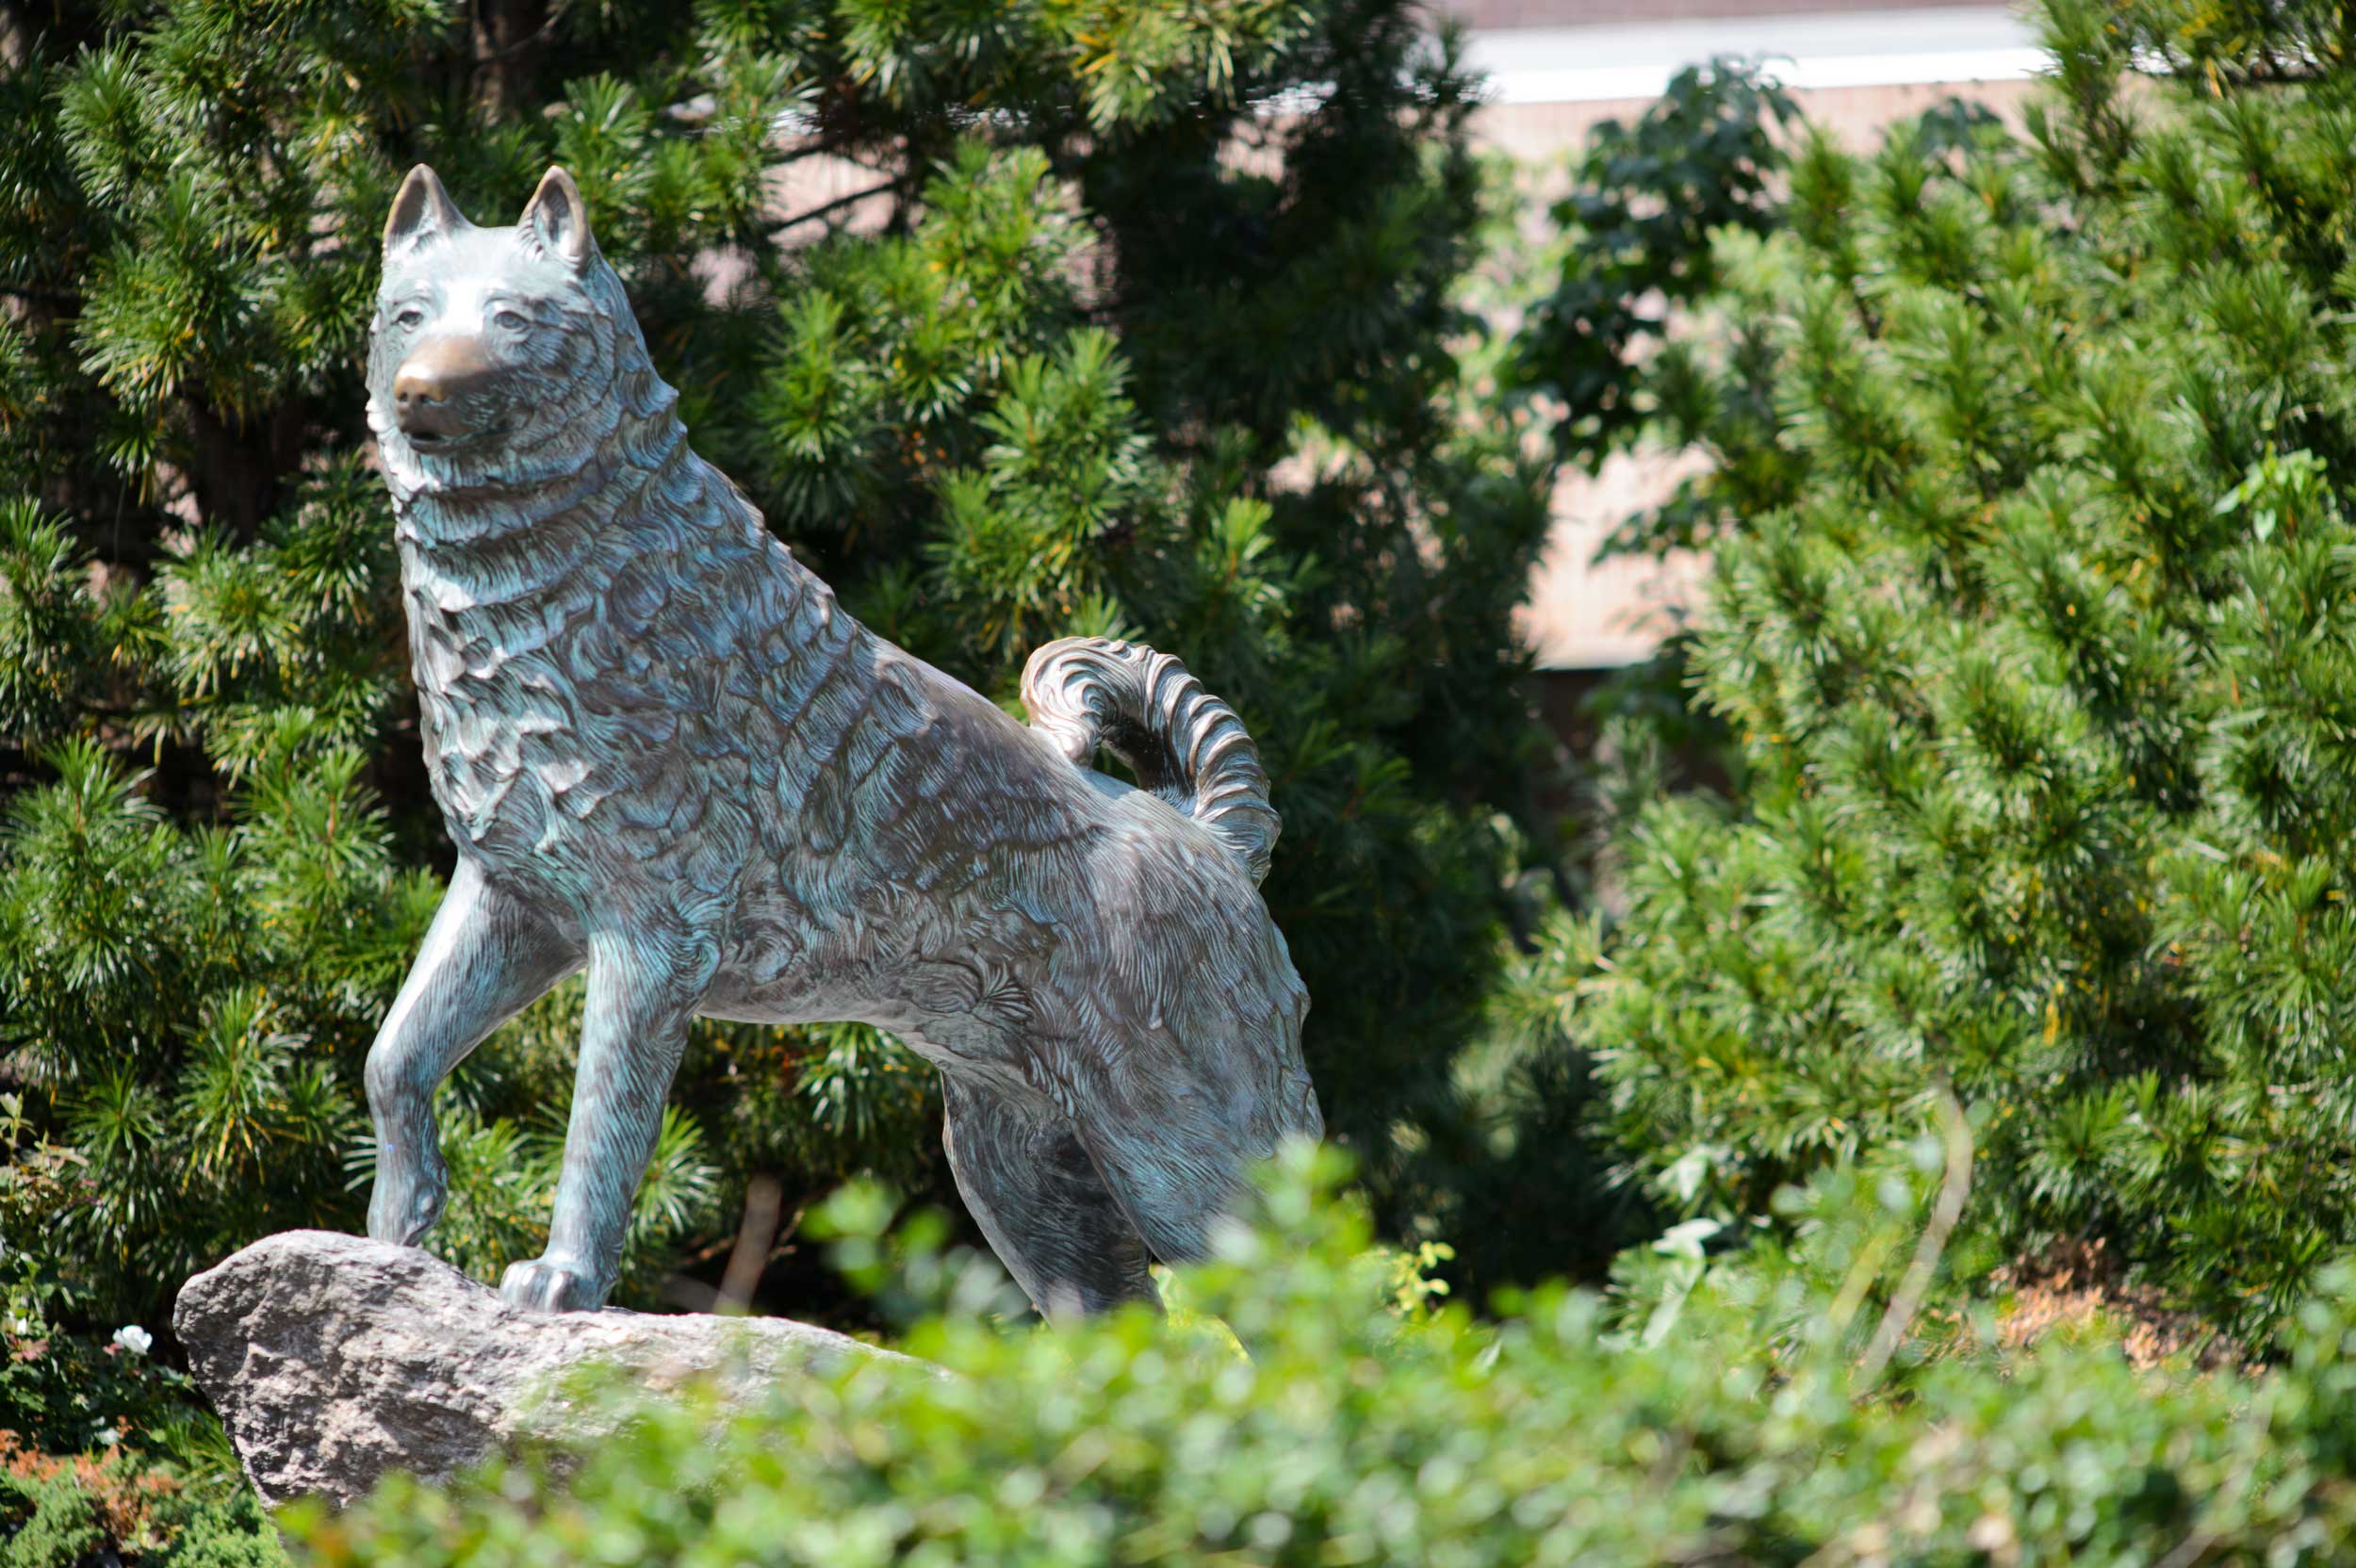 Jonathan the Husky statue in UConn, Storrs Campus